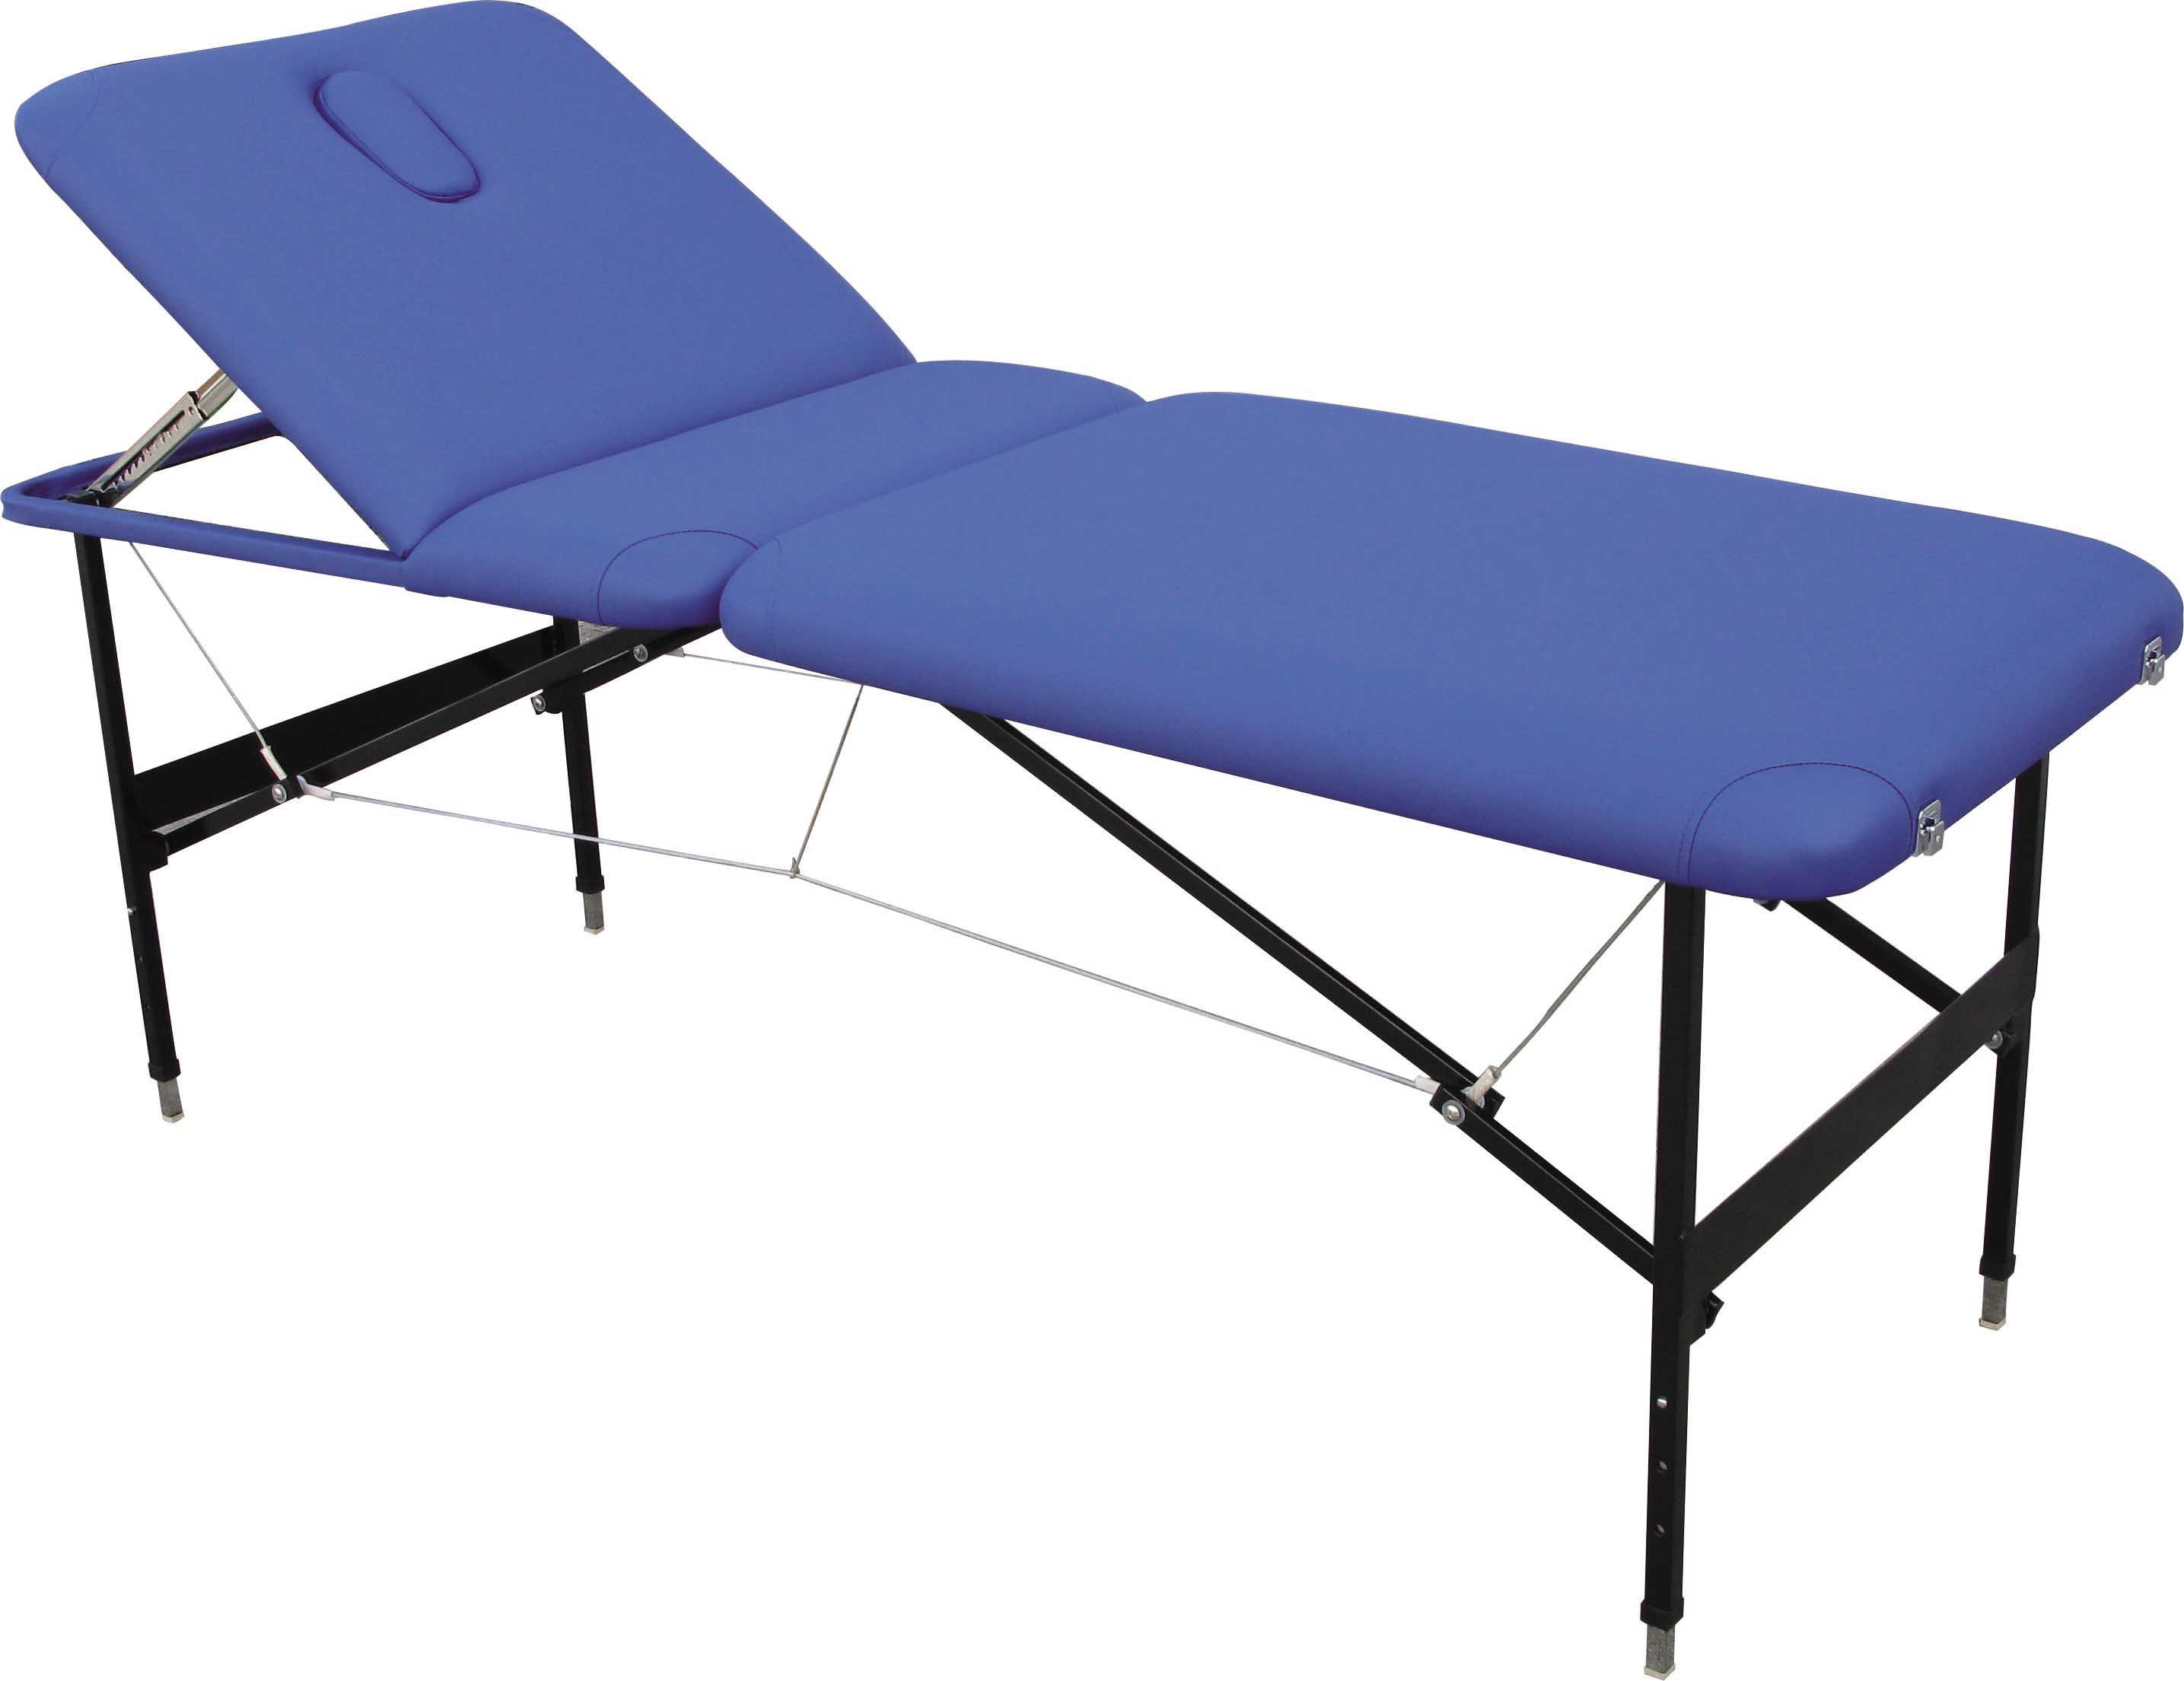 Portable Iron Massage Table With Cable System